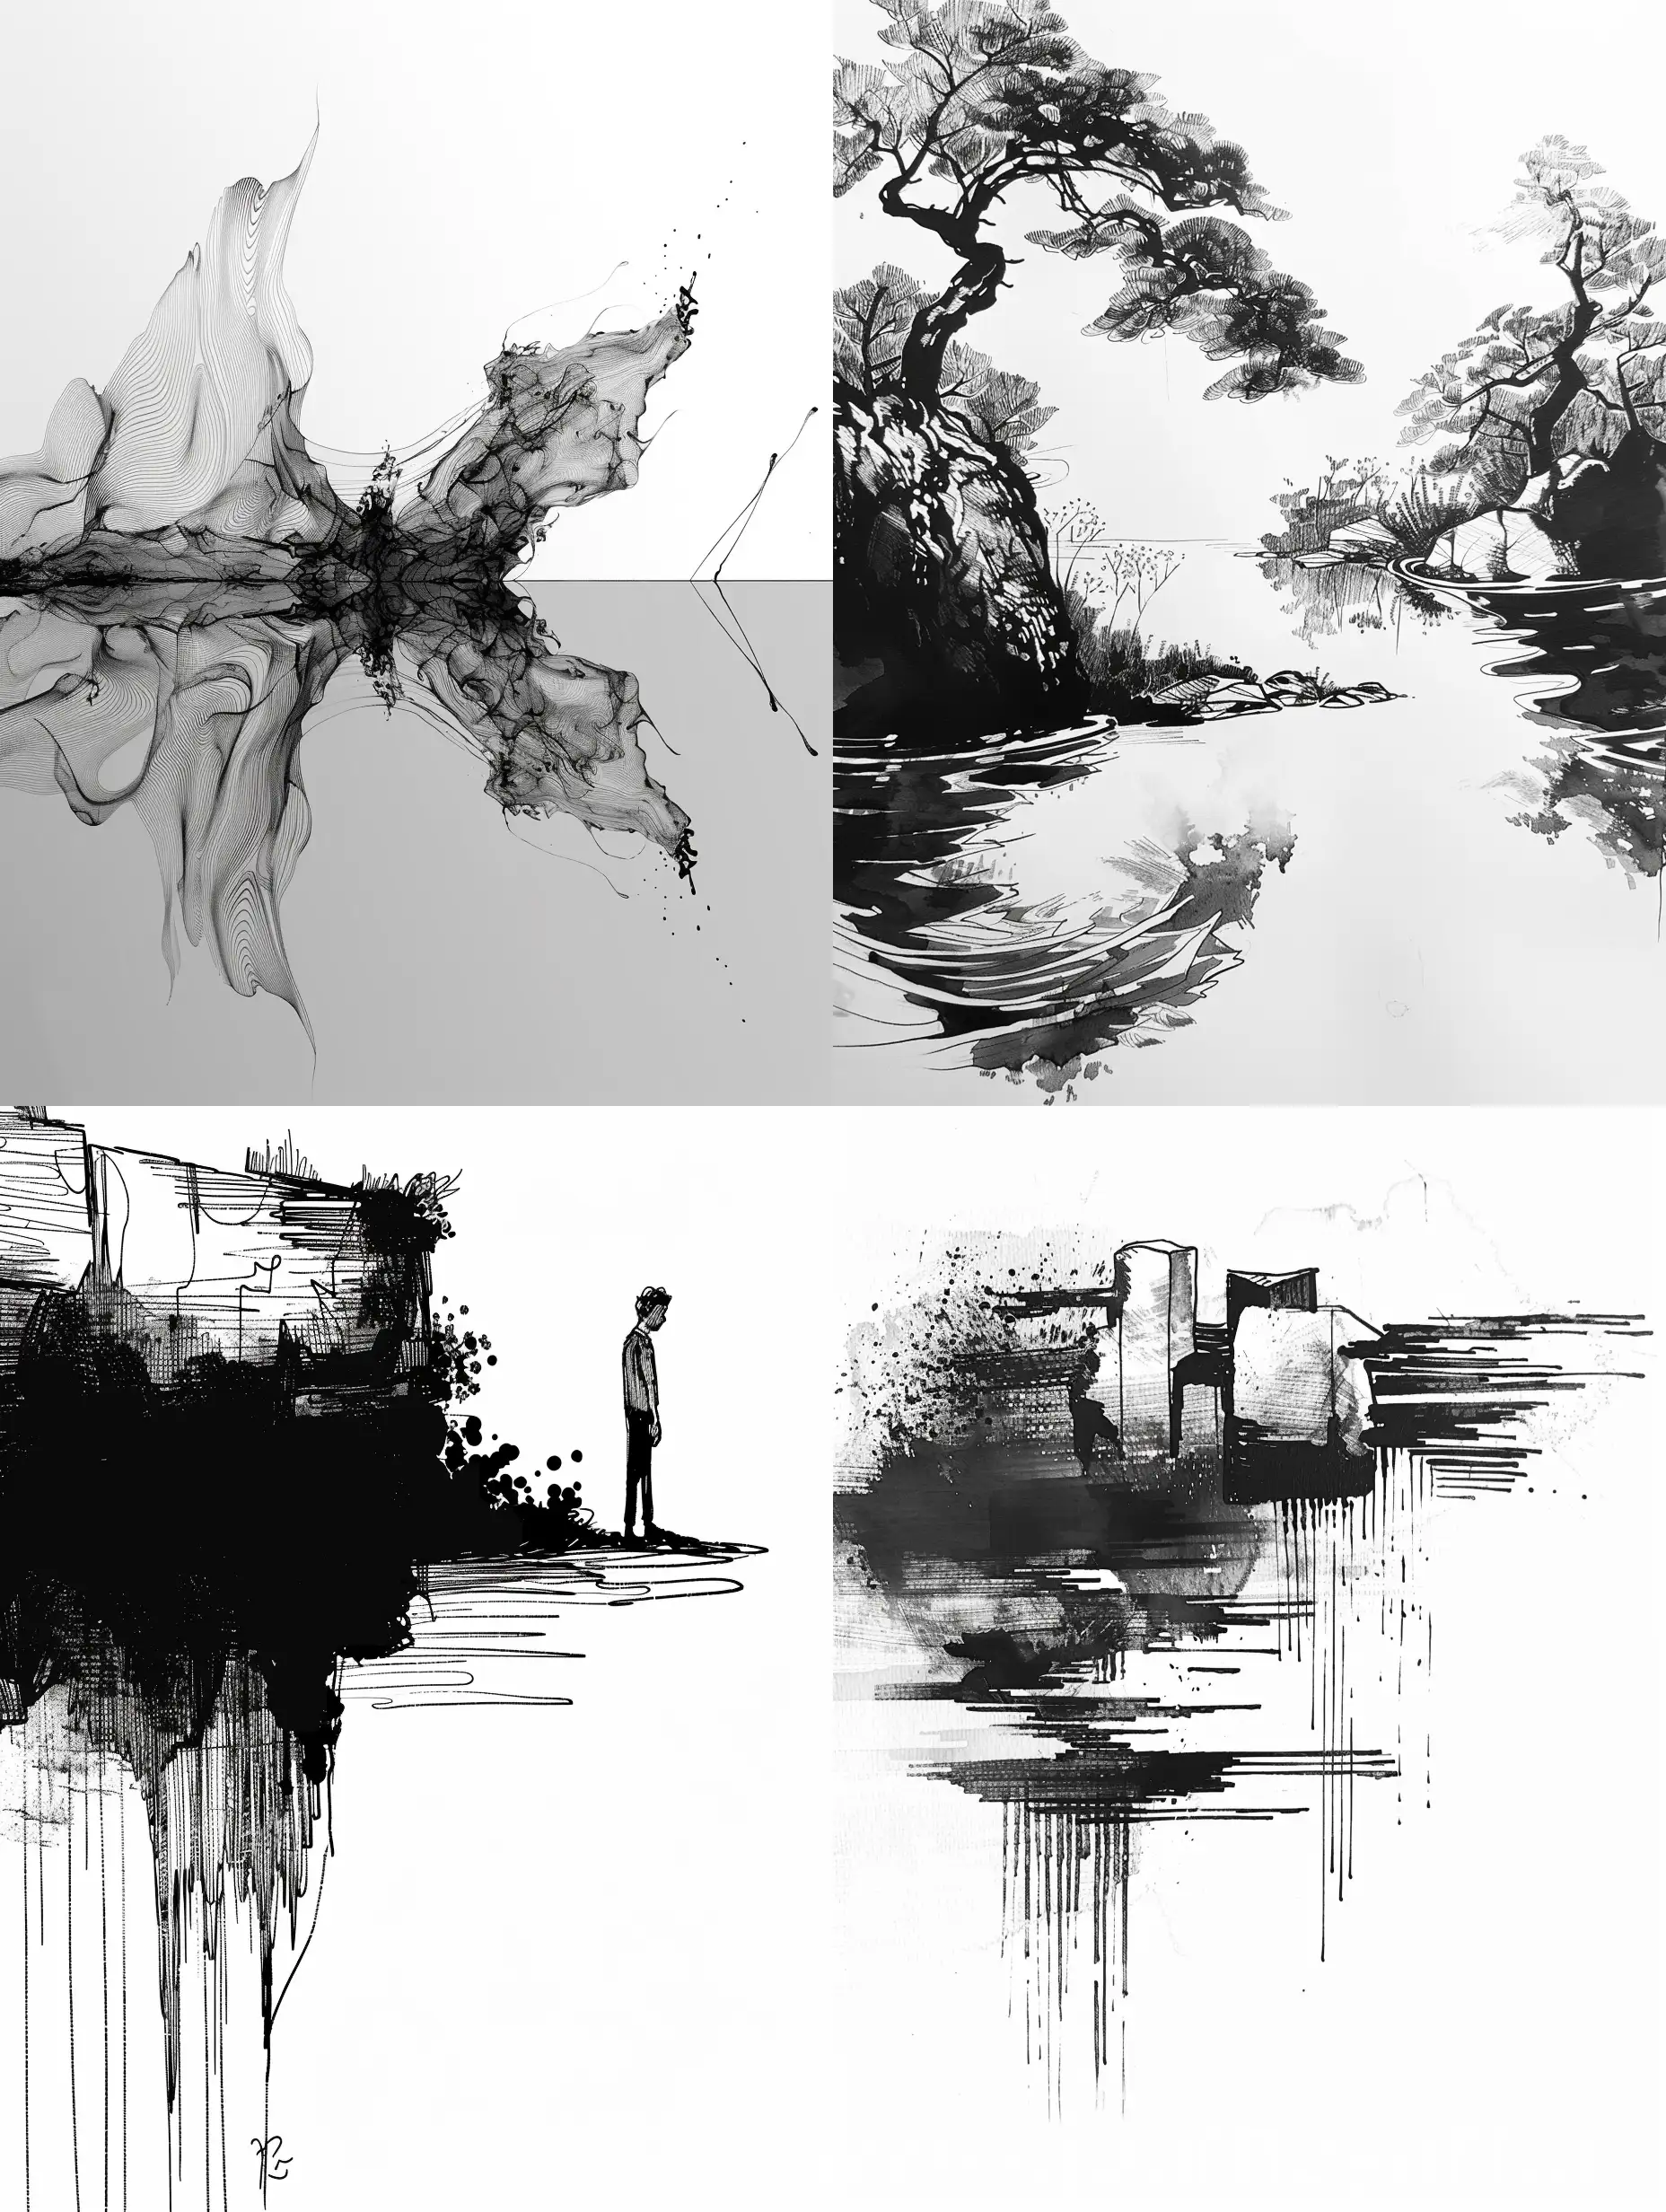 Tranquil-Monochrome-Ink-Art-Linear-Composition-in-Calm-Ambiance